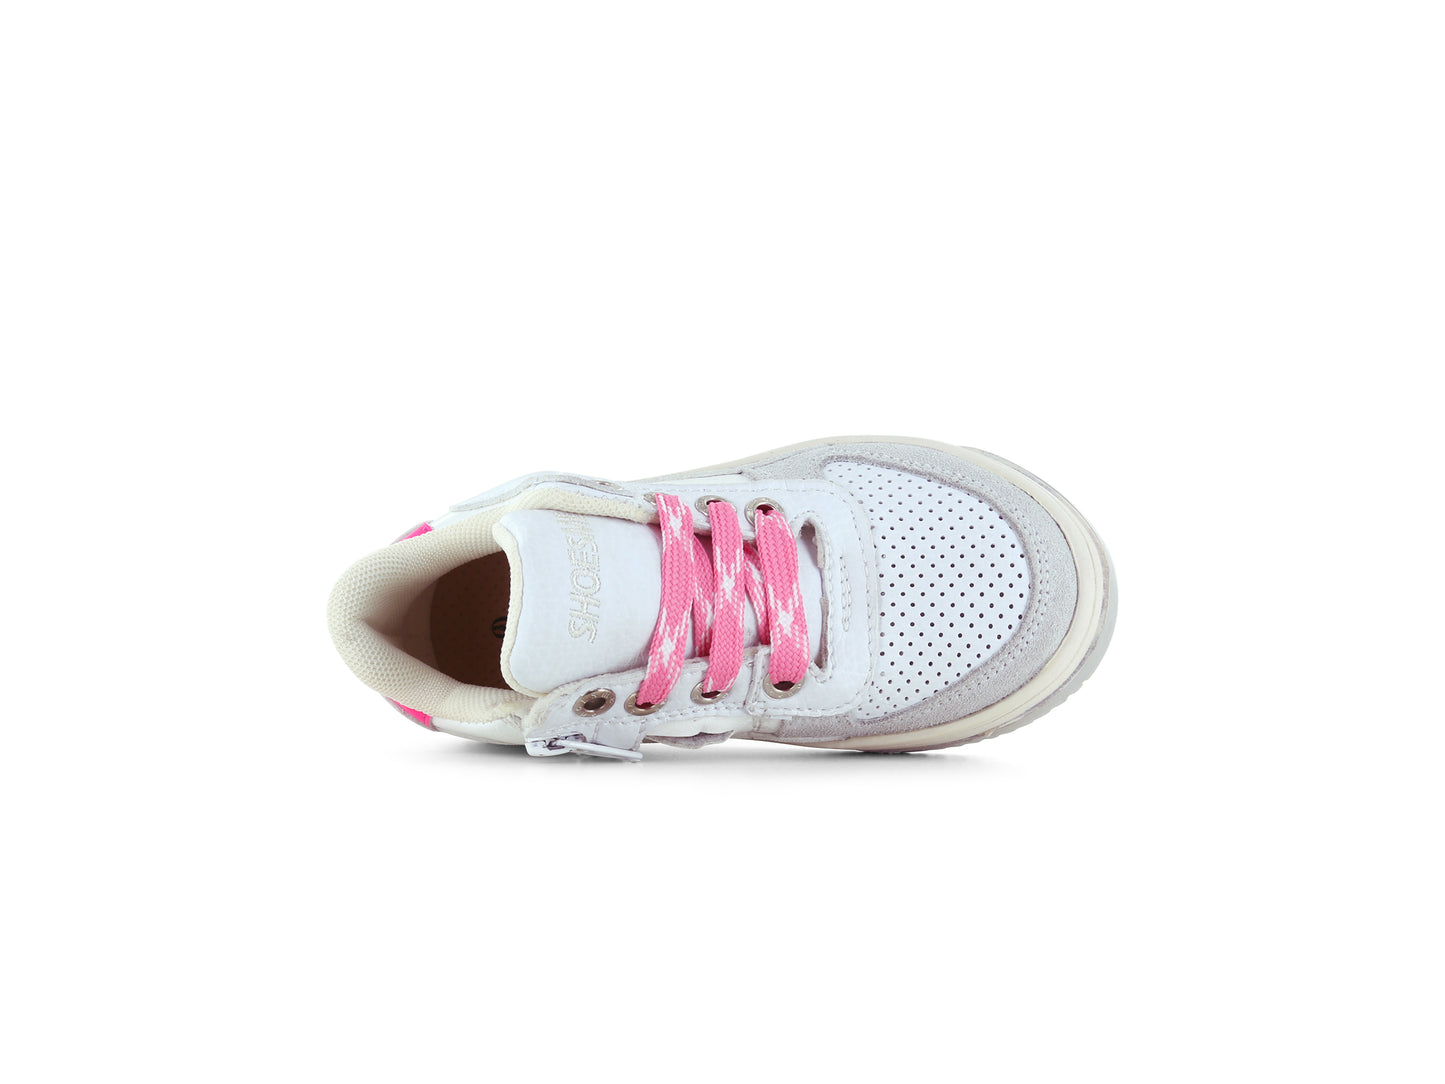 A girl's chunky trainer by Shoesme, style NO24S003-A, in white leather with pink and lilac trim set on a cream sole unit.
Pink lace and zip fastening.
Front view.